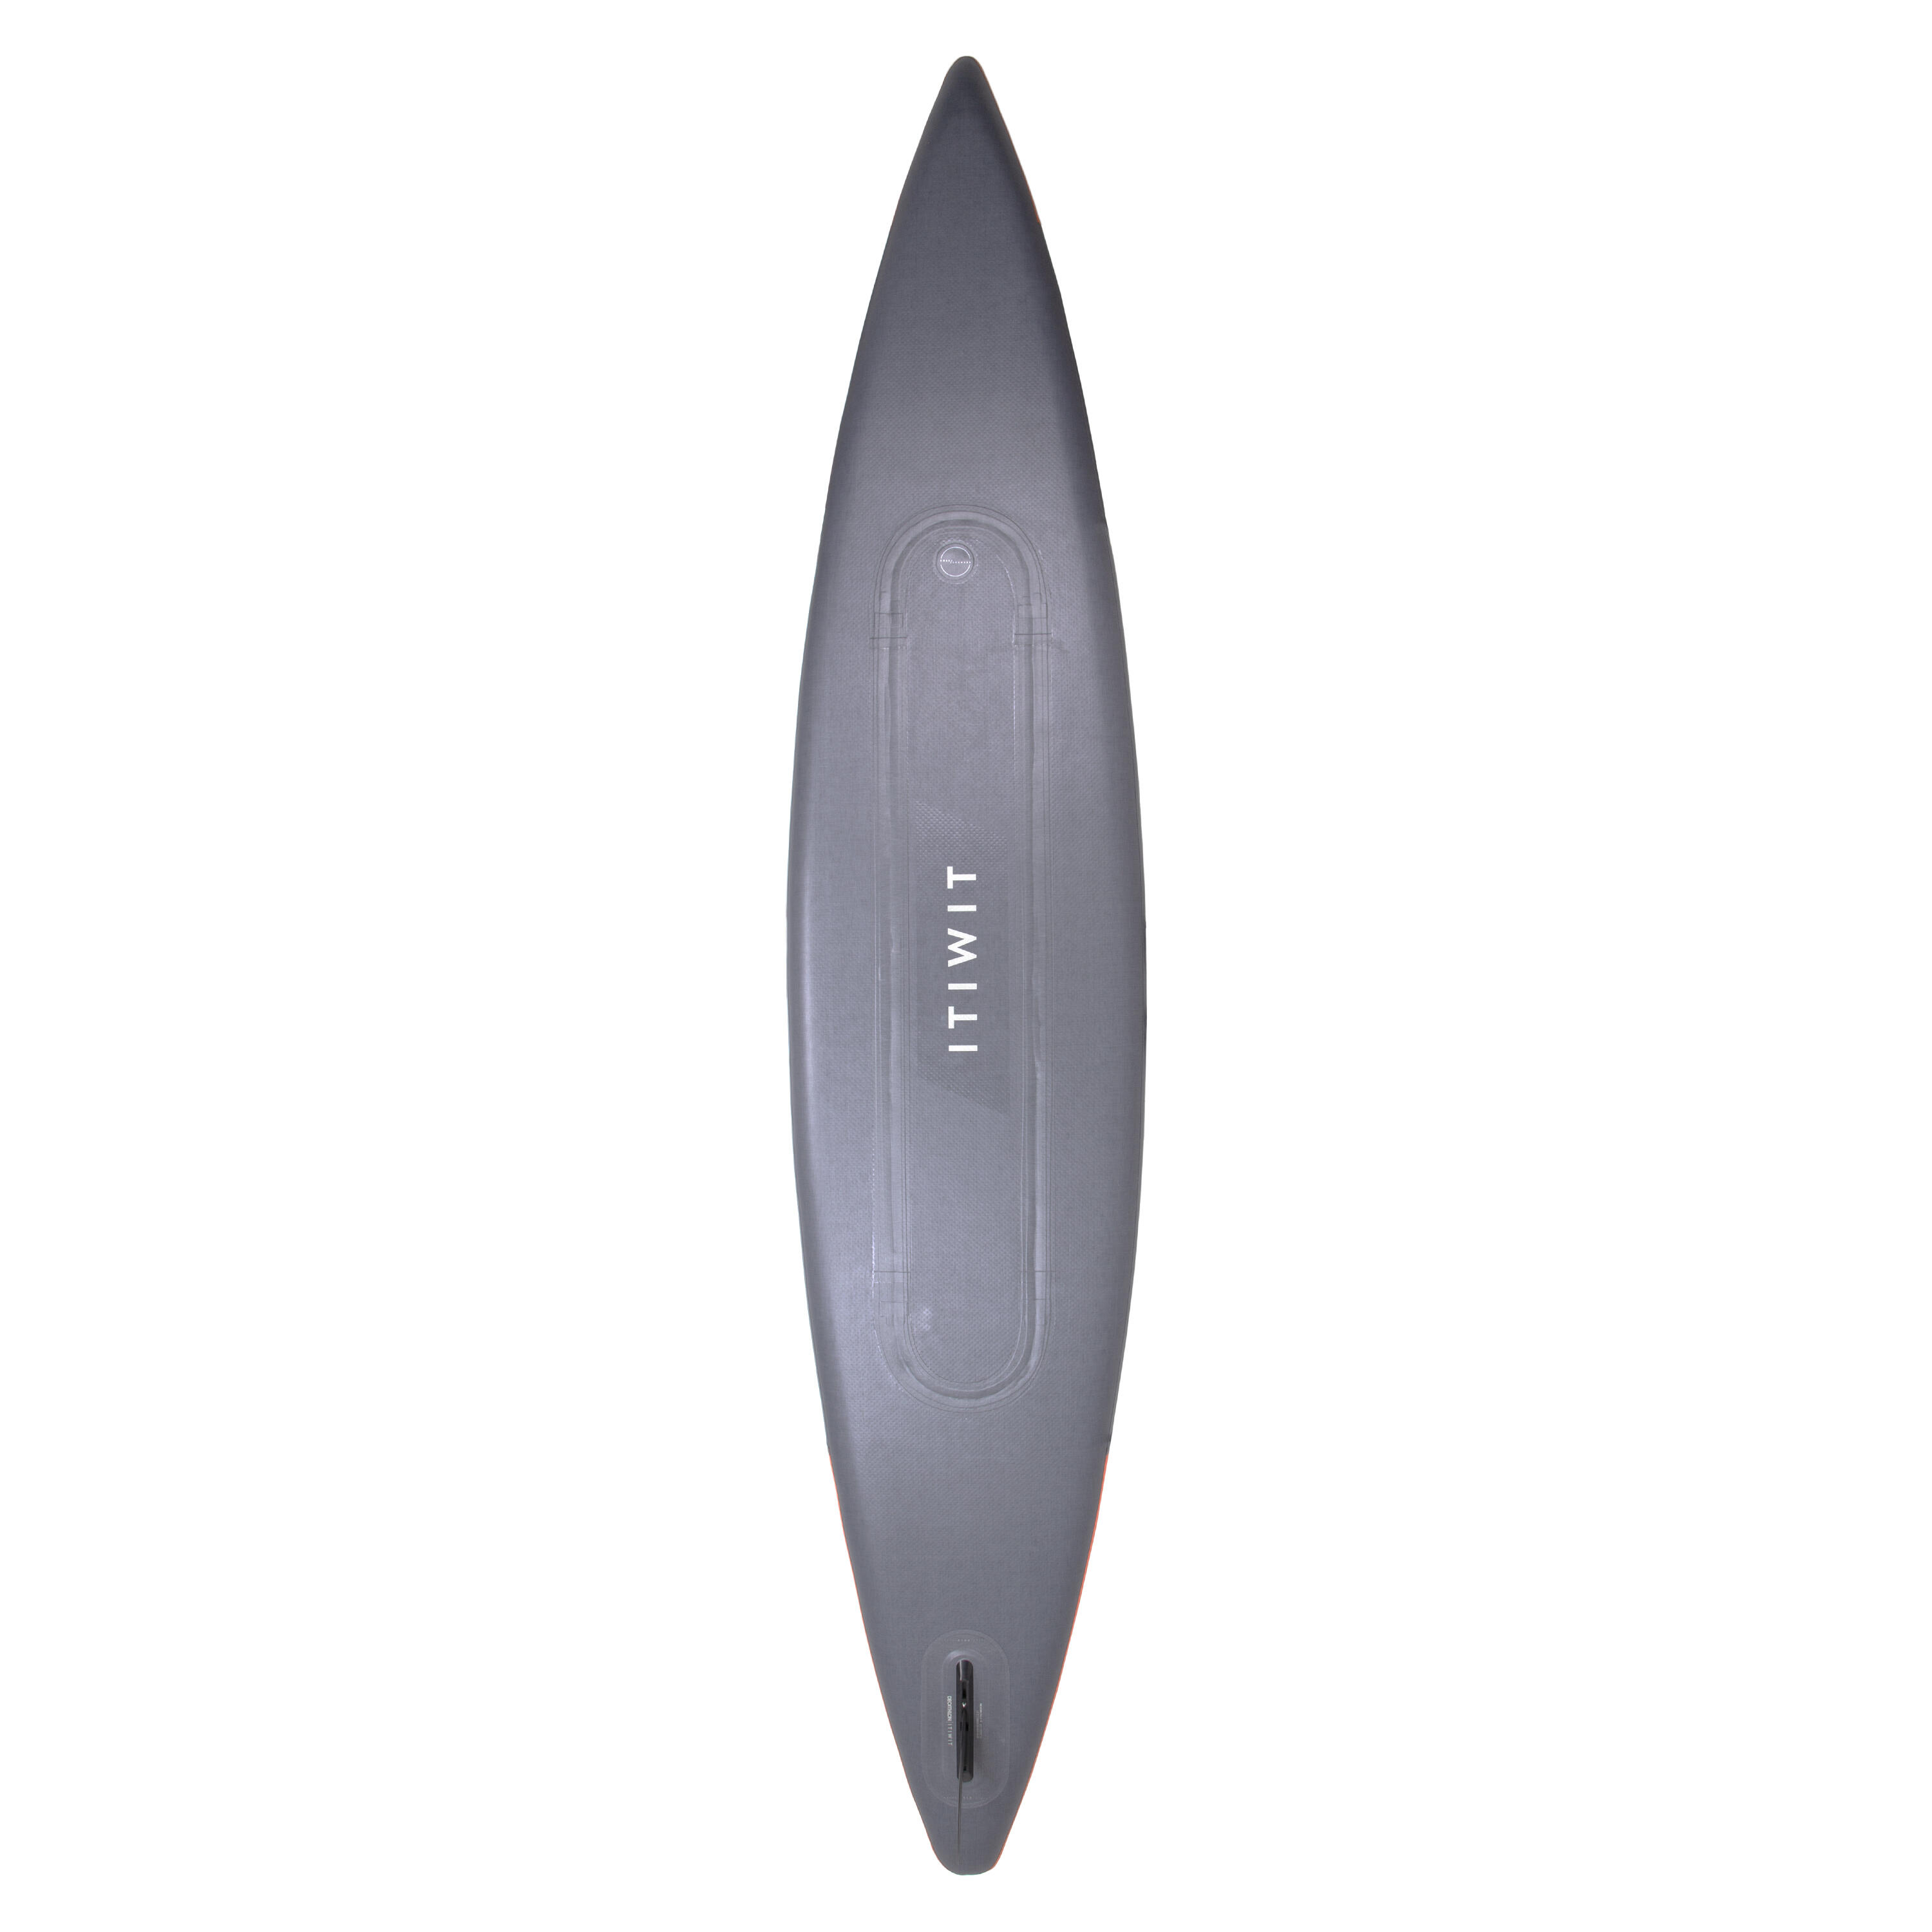 X900 14FT EXPEDITION INFLATABLE STAND-UP PADDLEBOARD (DOUBLE CHAMBER) 7/26